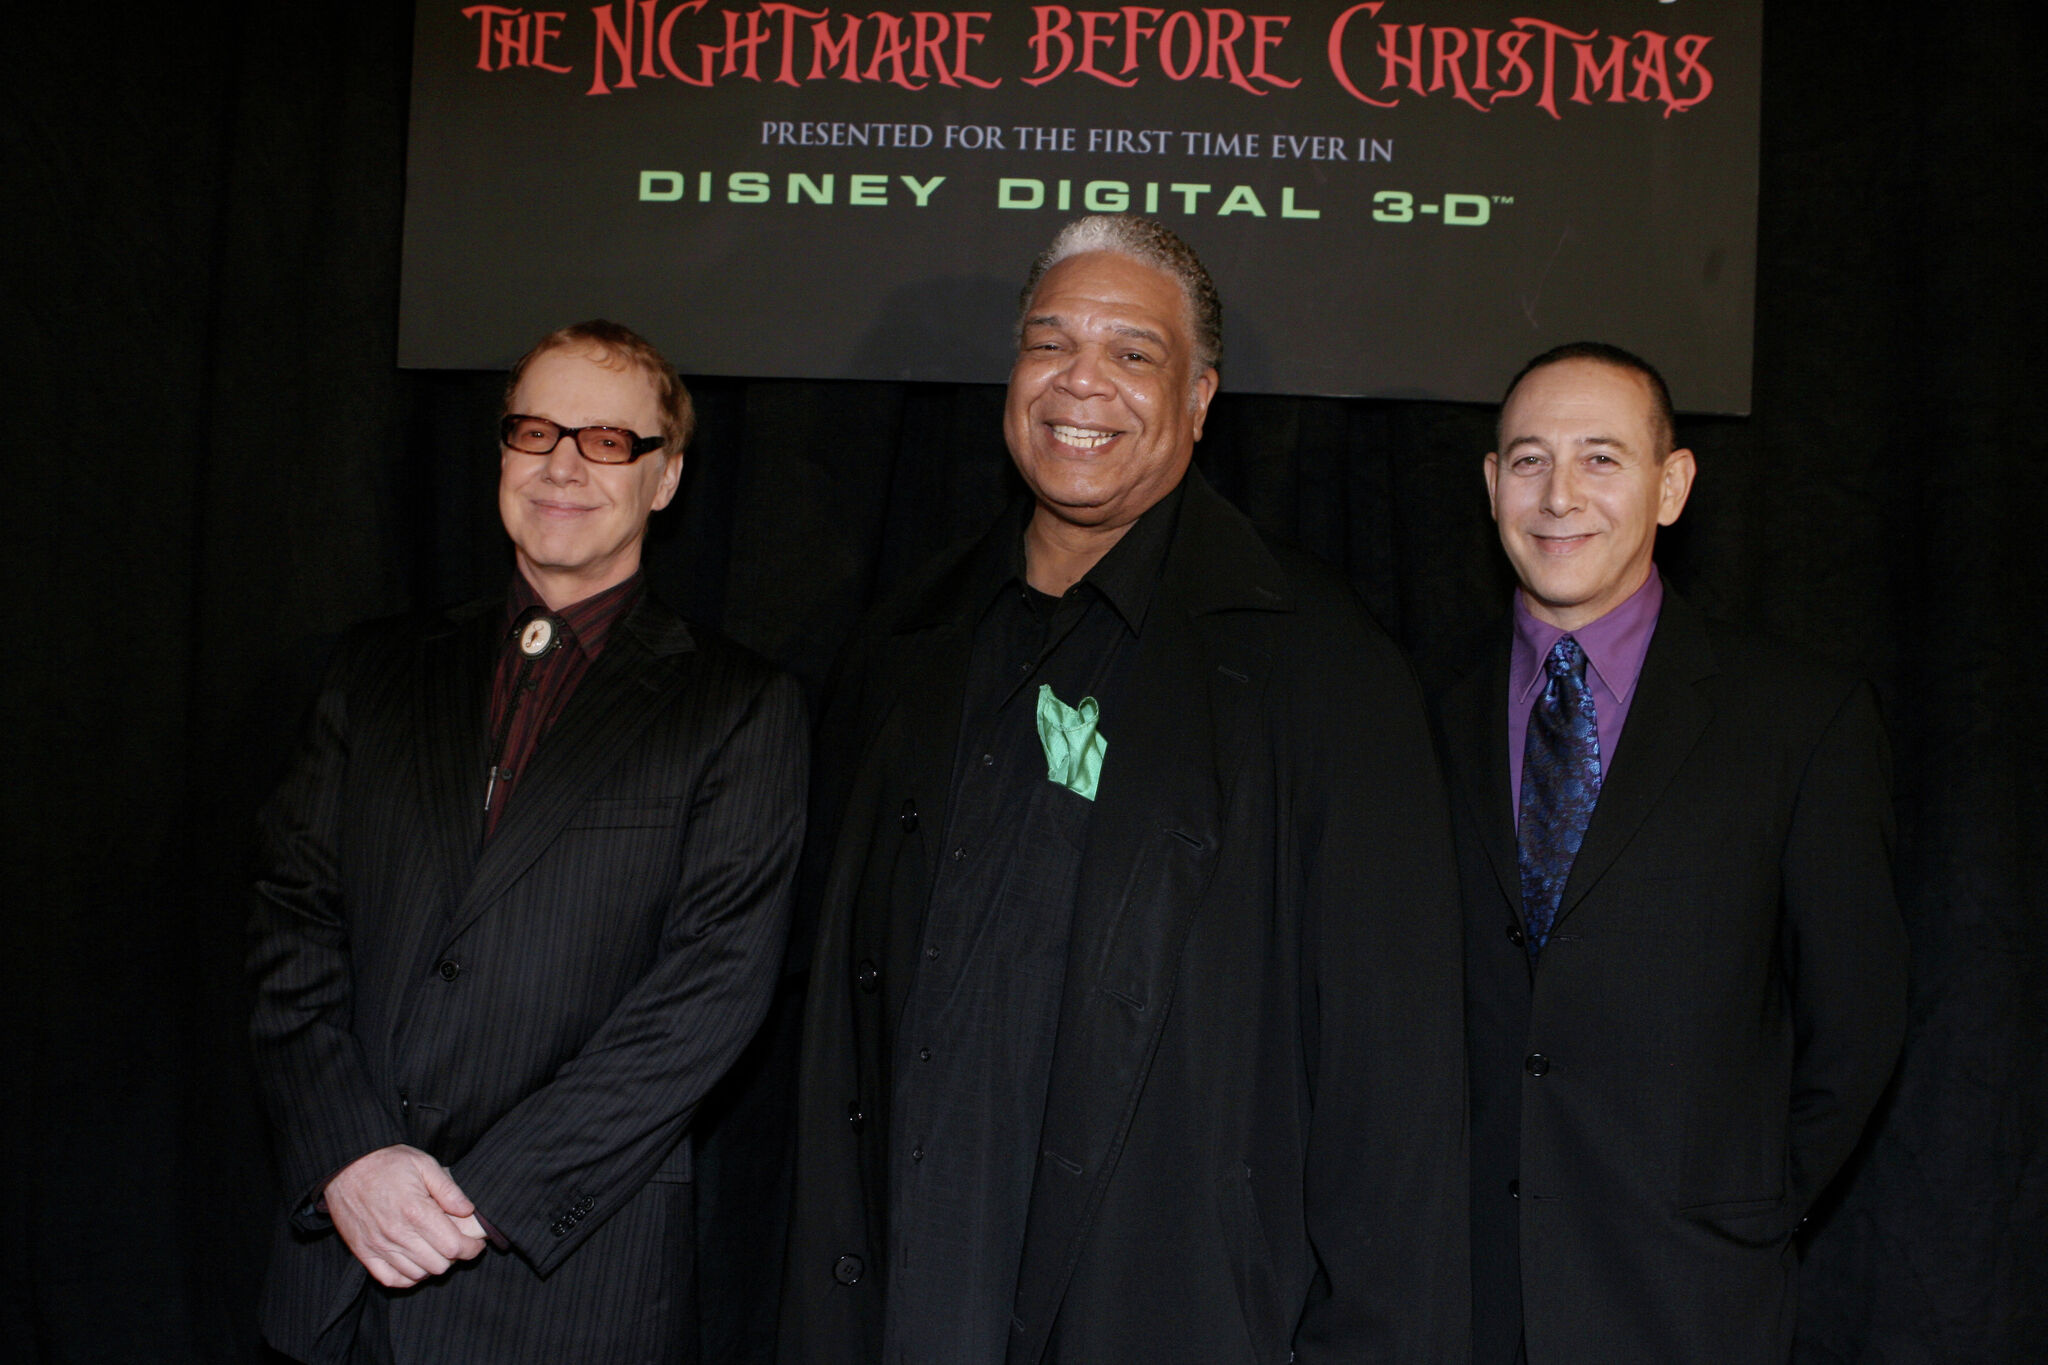 Interview: Ken Page recalls playing 'Nightmare Before Christmas